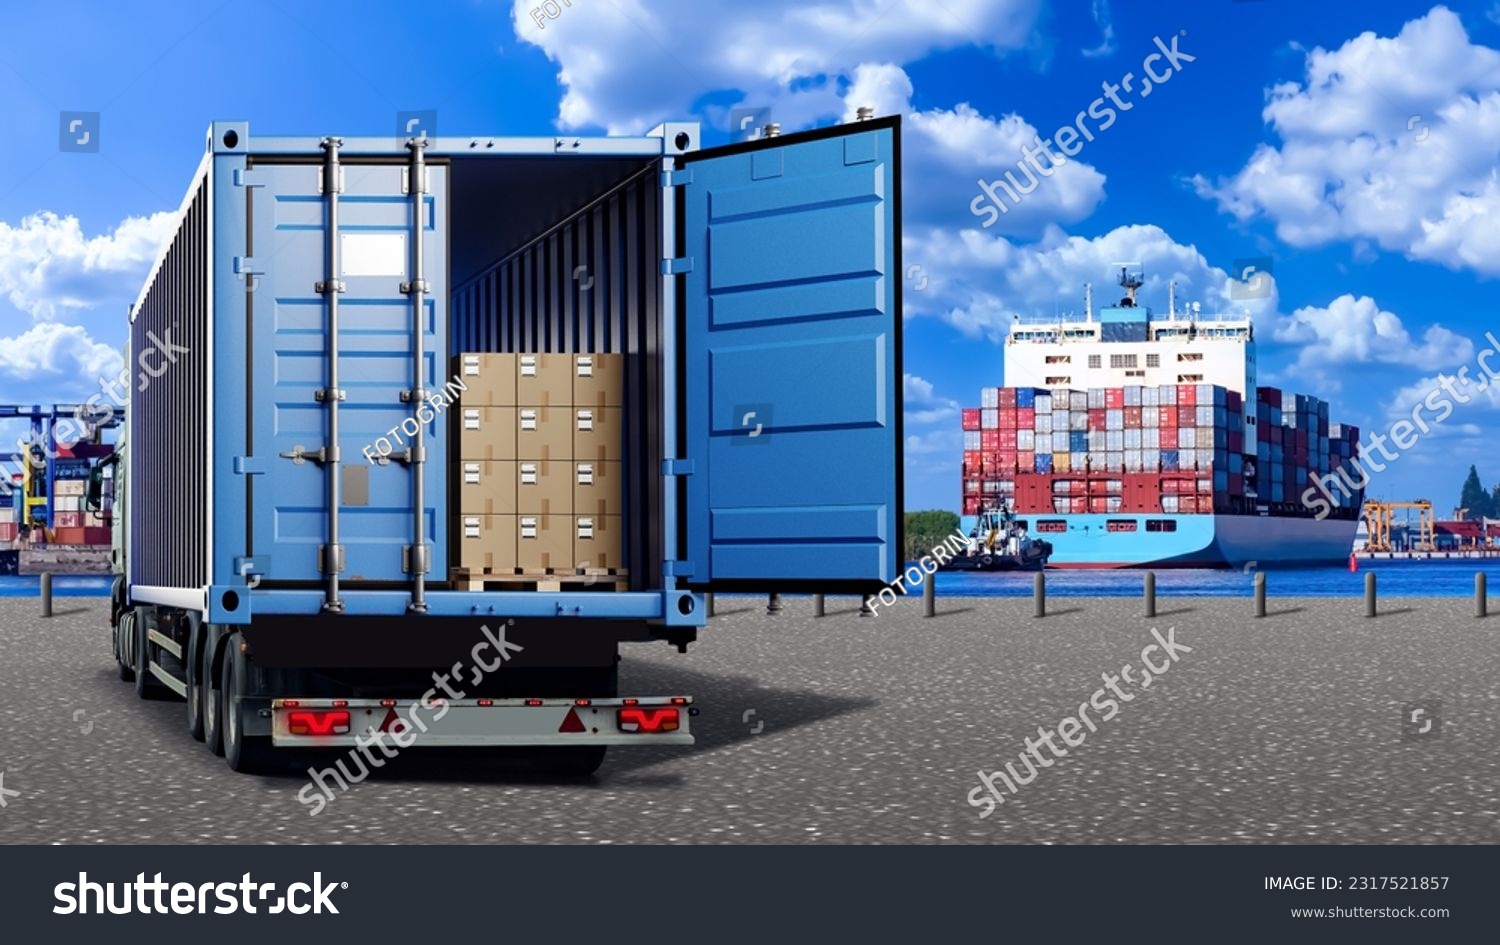 Truck in harbor. Open container with boxes. Sea harbor. Place for unloading ships. Harbor on ocean. Port logistics. Truck with boxes. Cargo port in summer weather. Ship waiting for unloading in port #2317521857